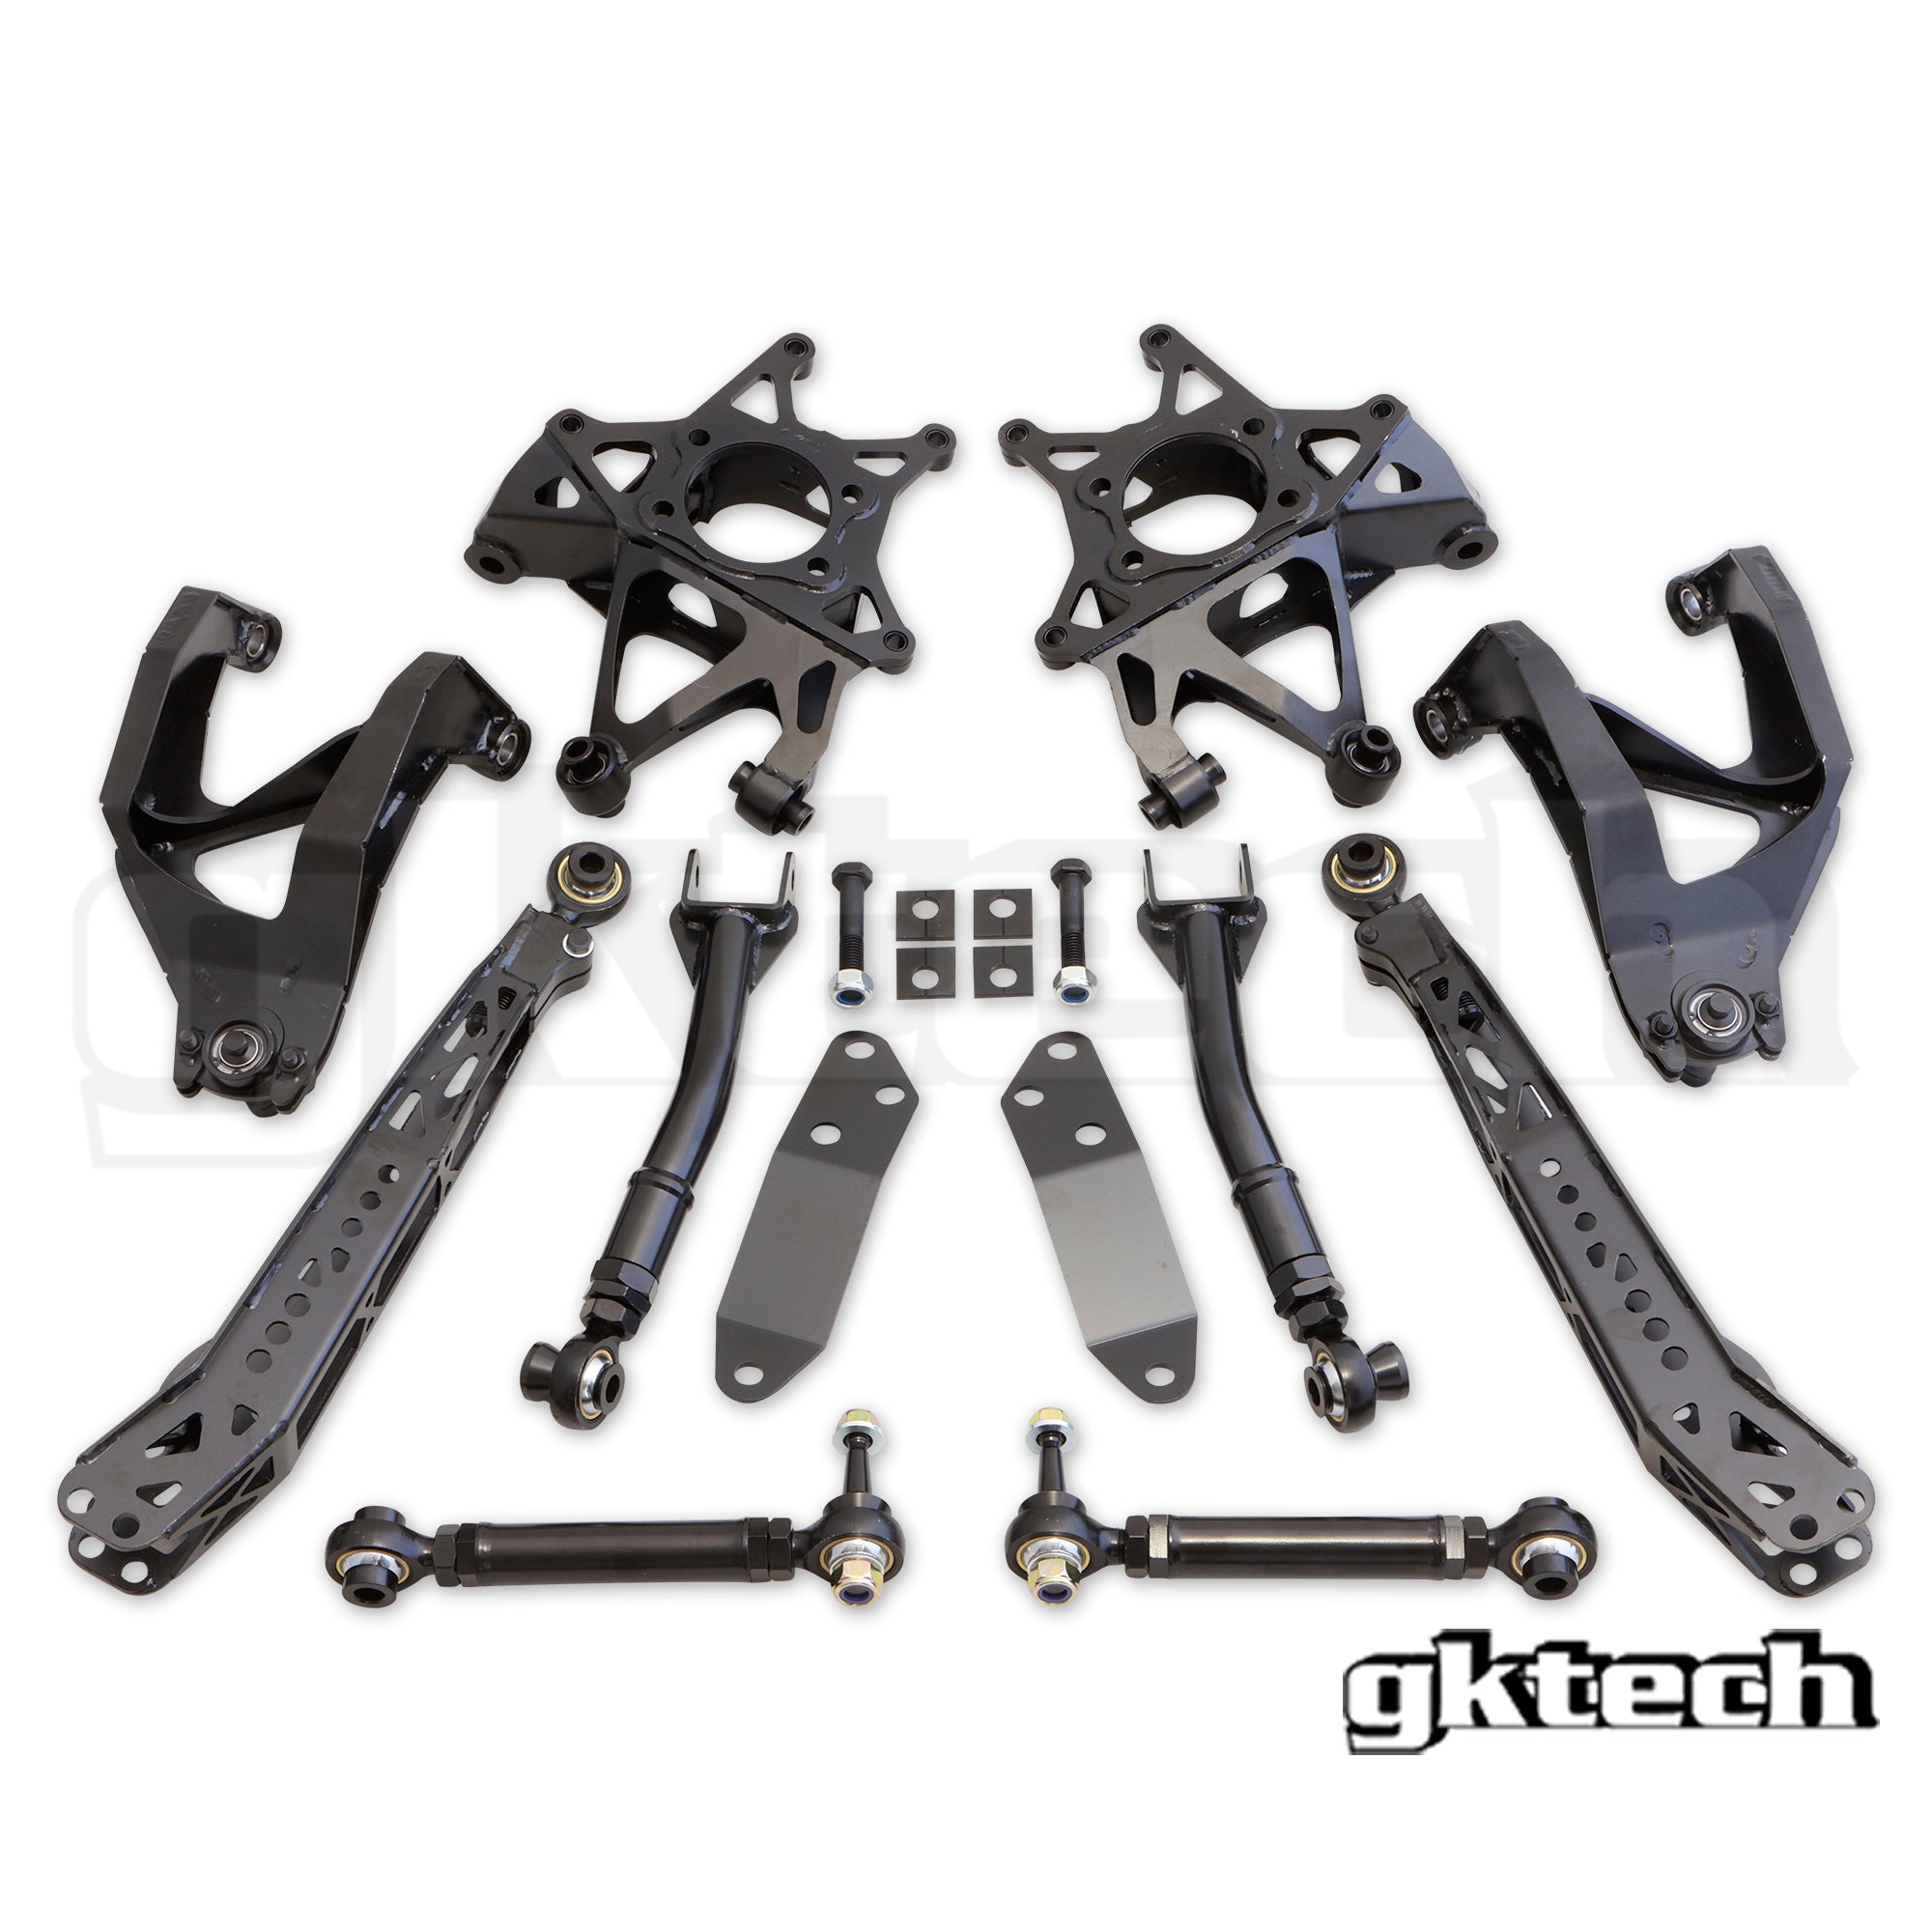 FRS / GR86 / BRZ rear suspension package (20% combo discount)